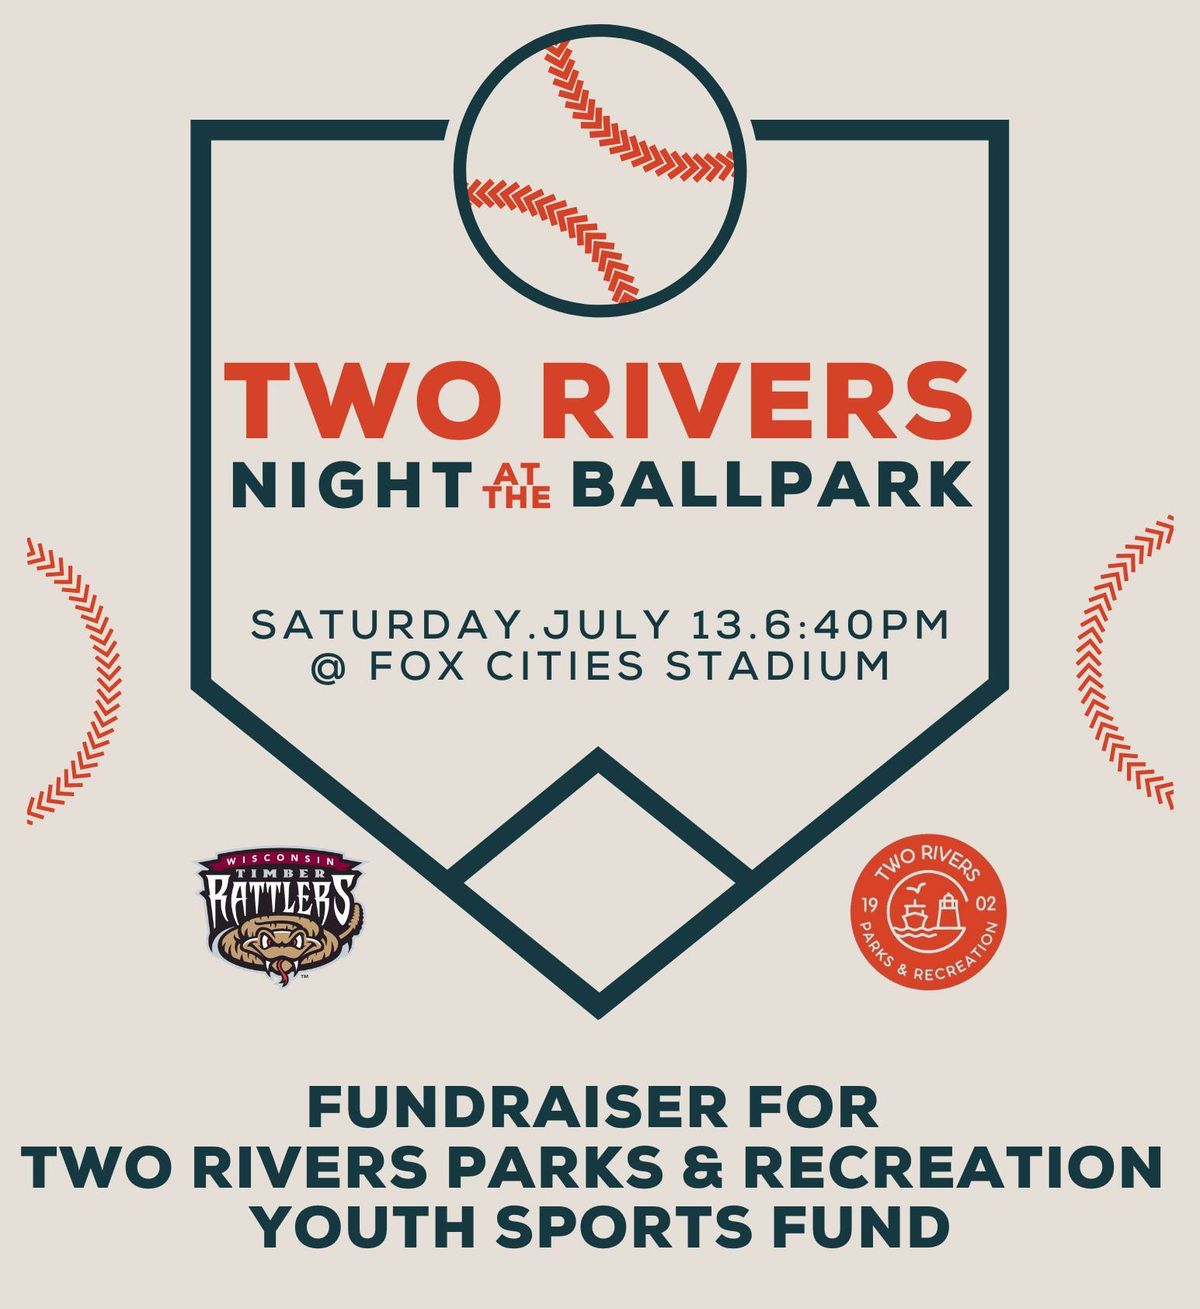 Two Rivers Night at the Ballpark - Fundraiser for Youth Sports Fund